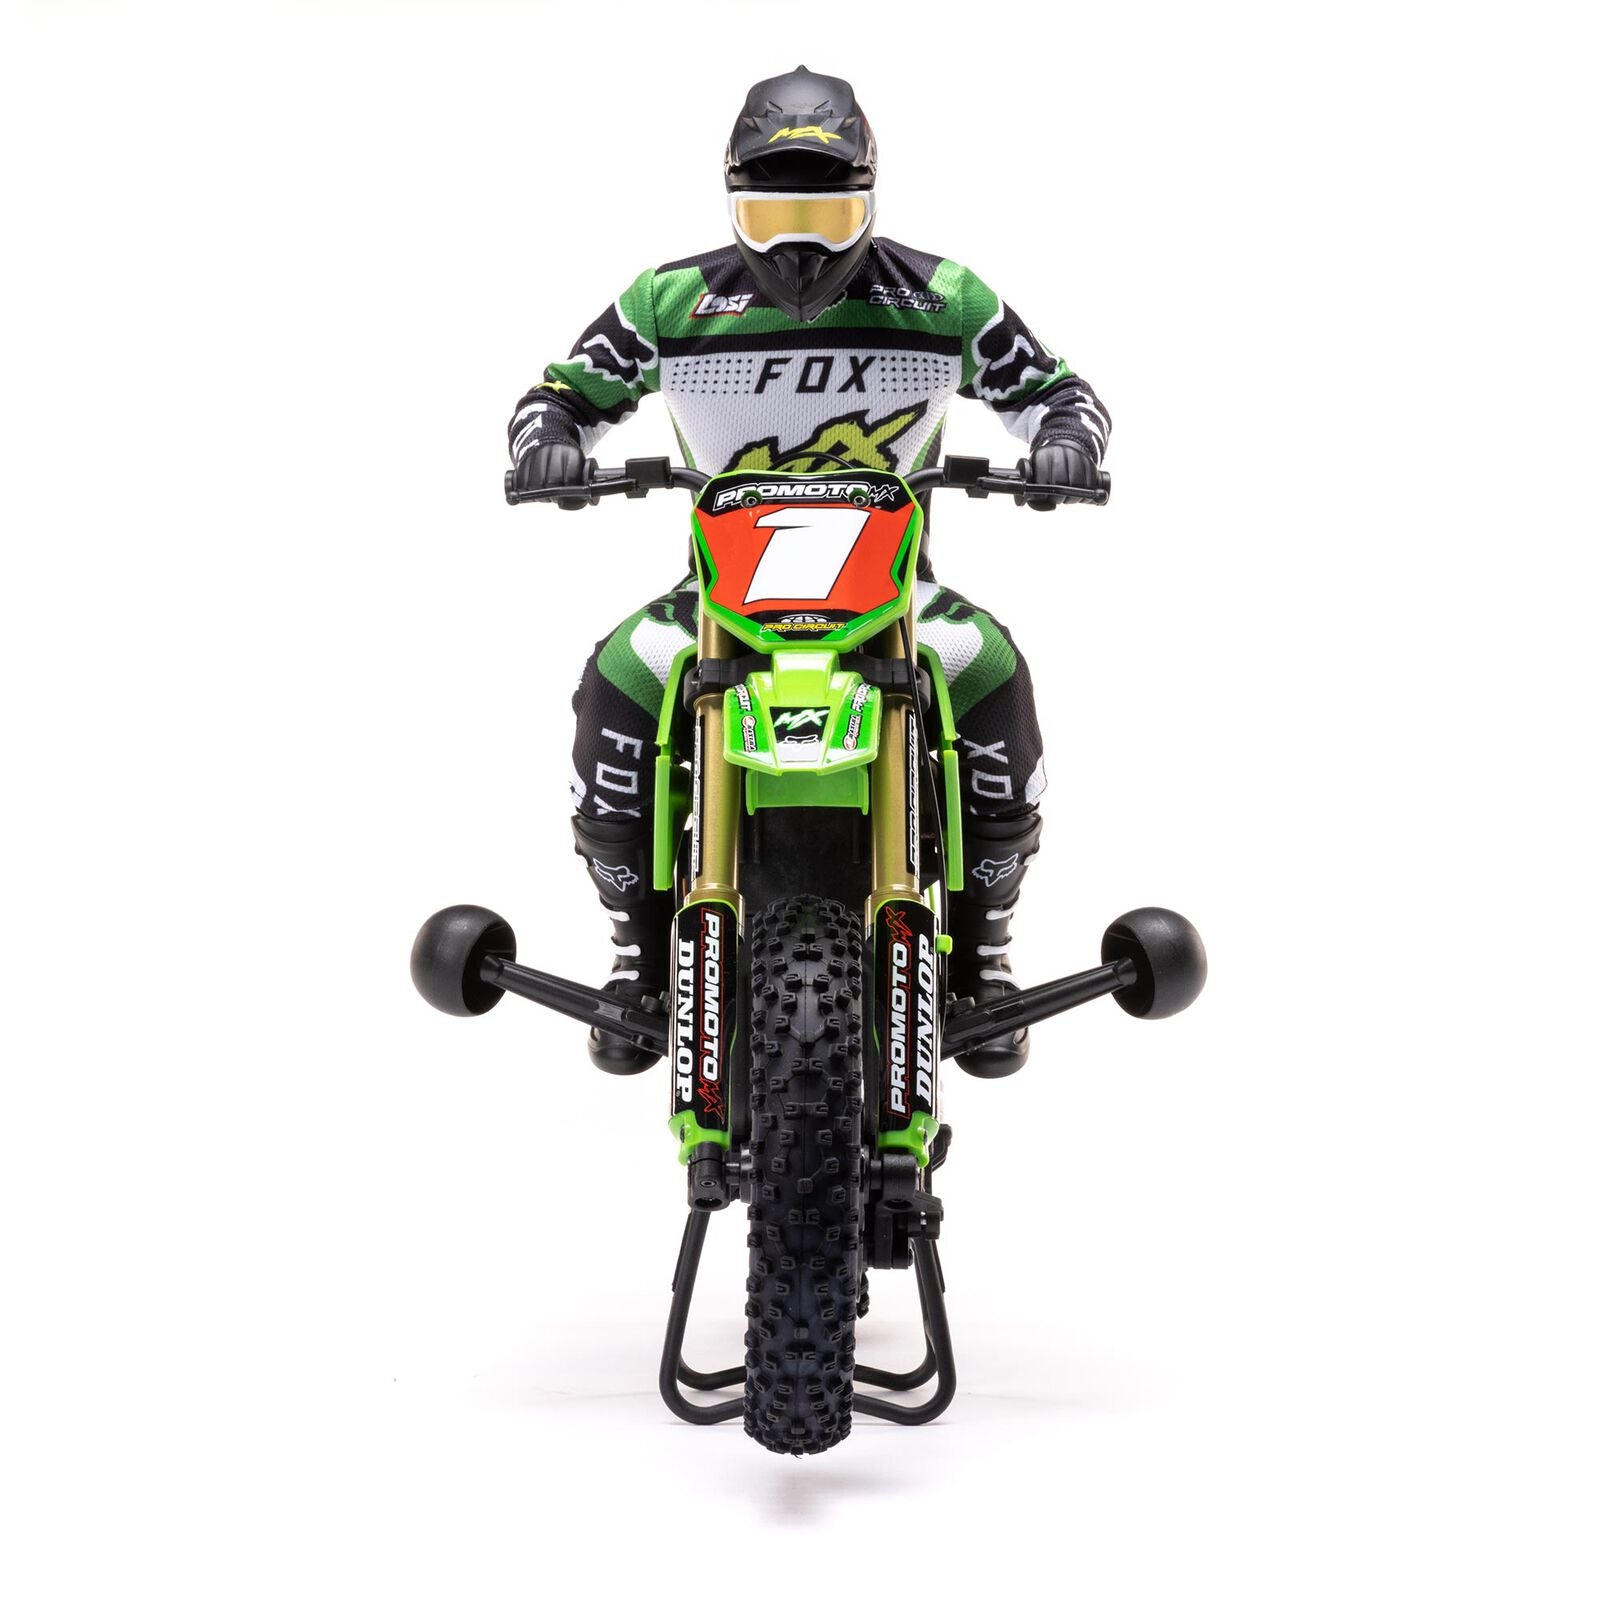 Losi Promoto-MX RTR 1/4 Brushless Dirt Bike (Pro-Circuit) w/2.4GHz DX3PM Radio, MS6X & Battery & Charger